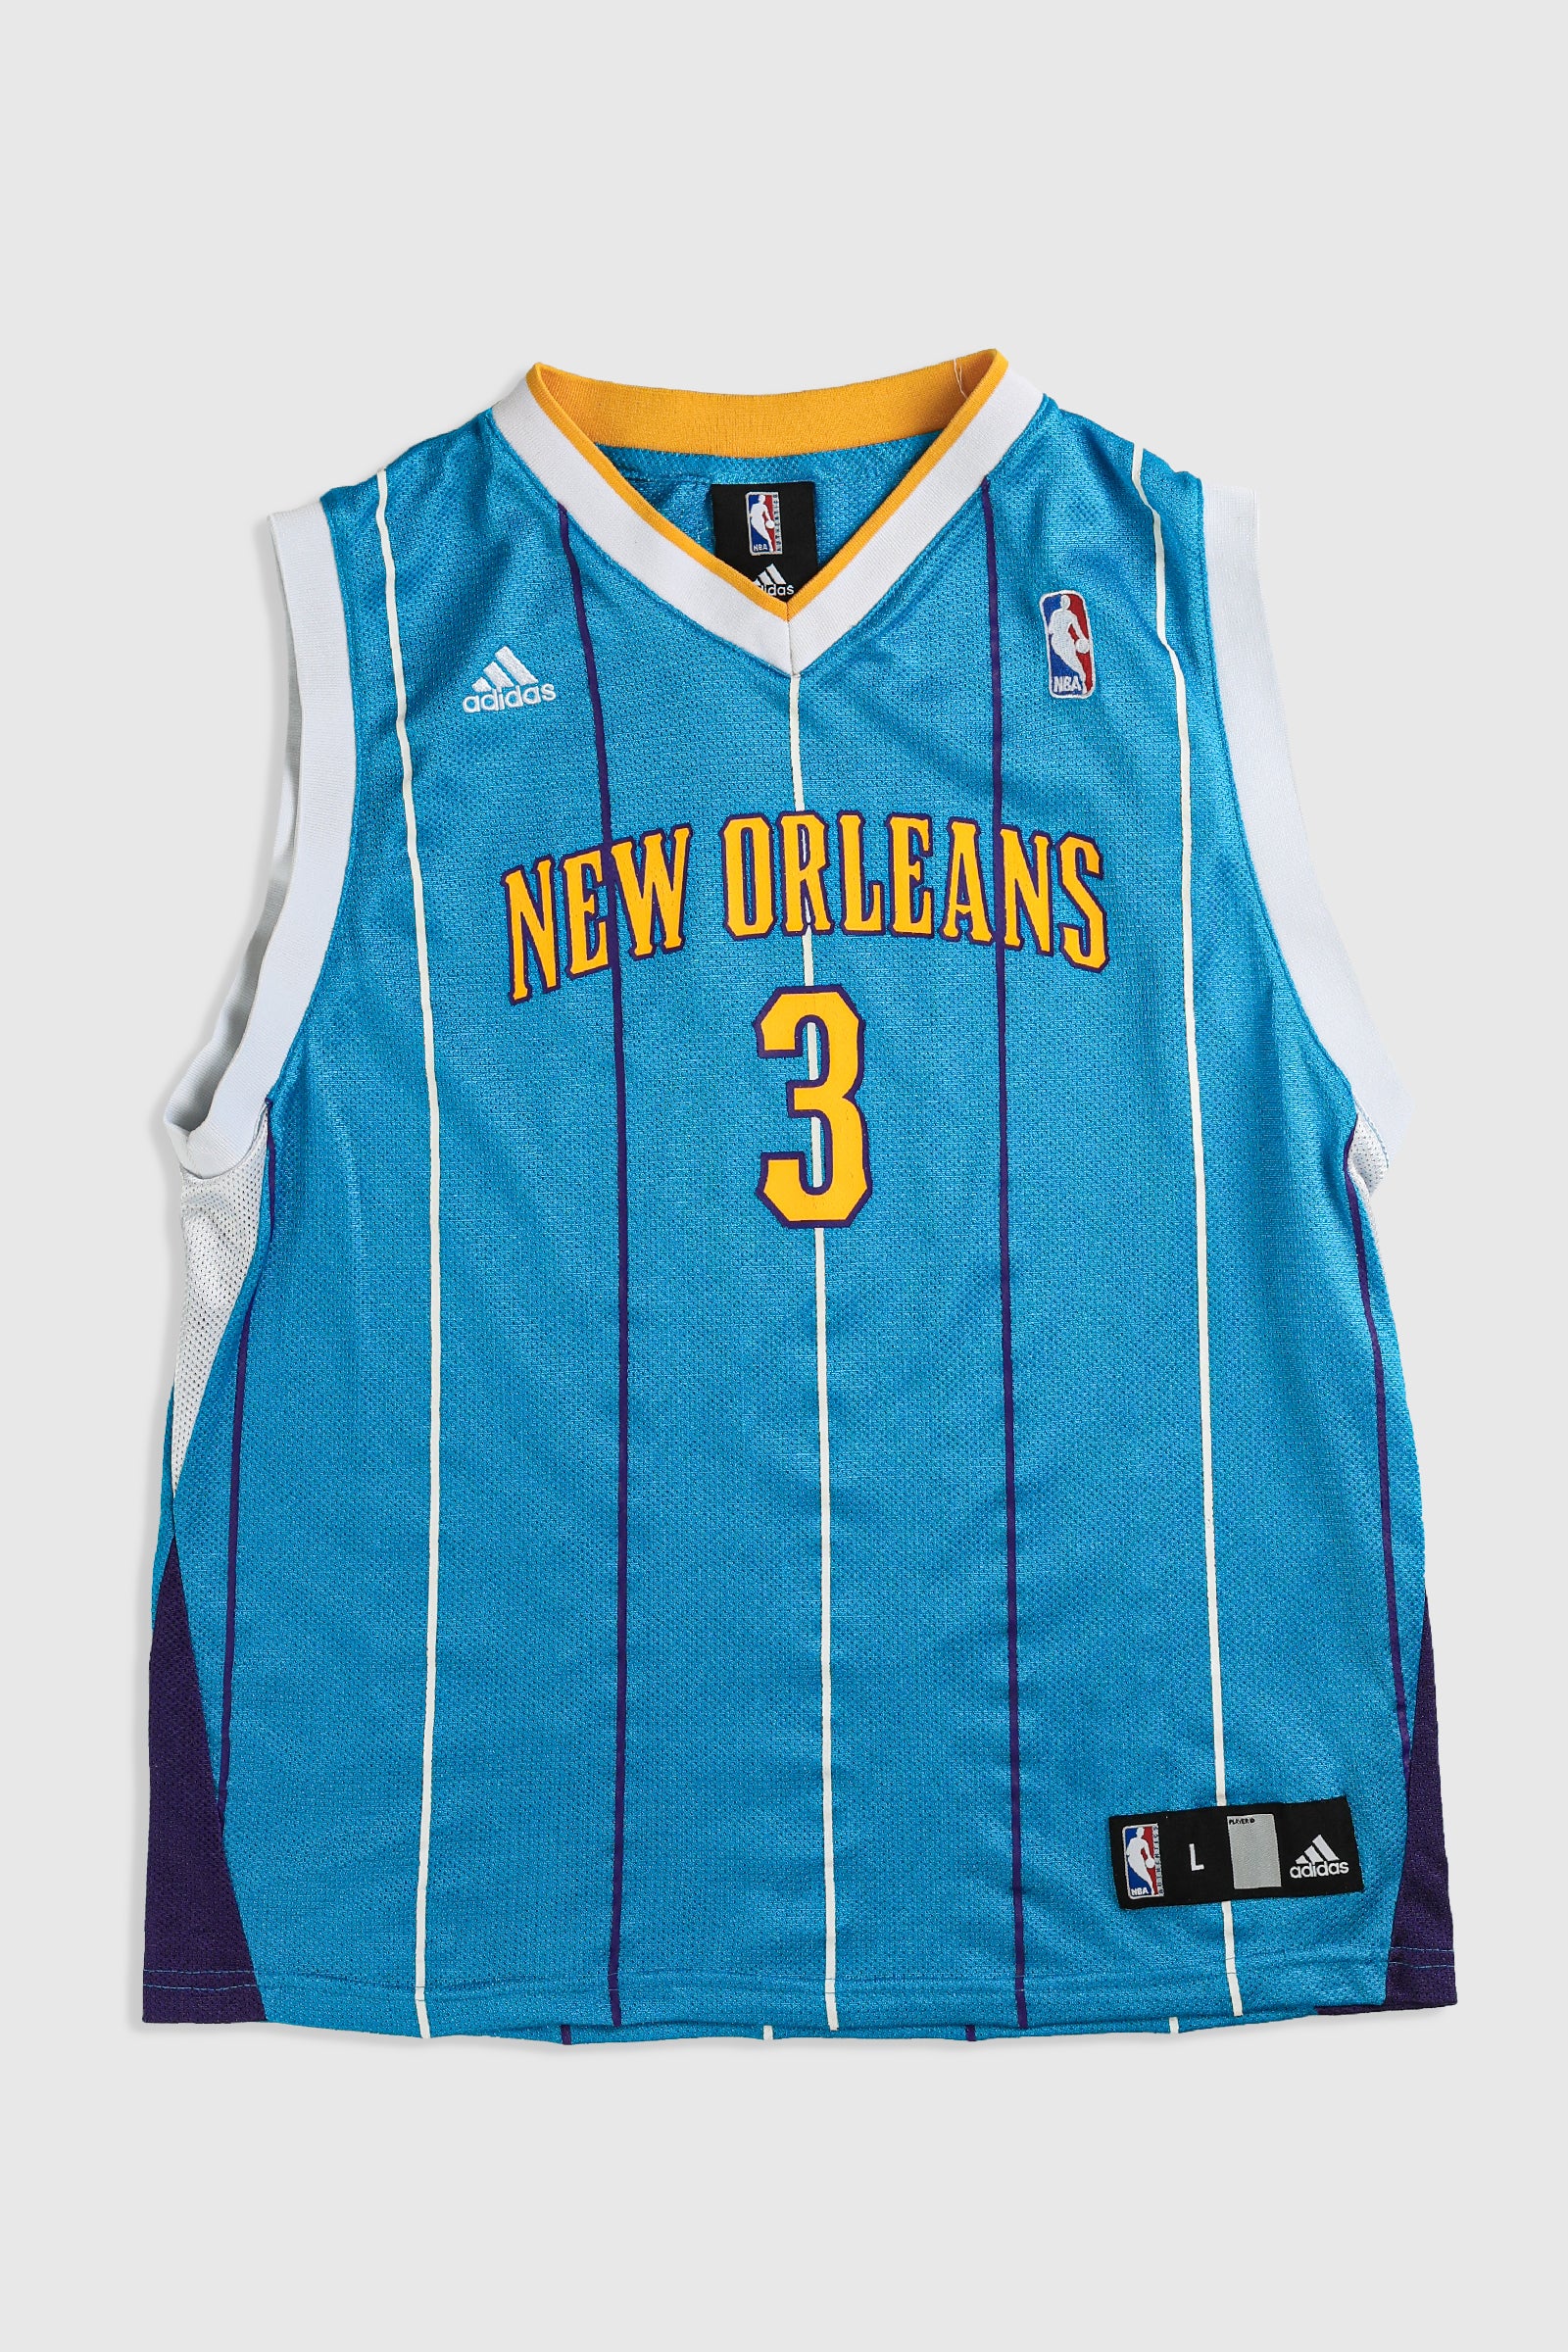 classic hornets jersey